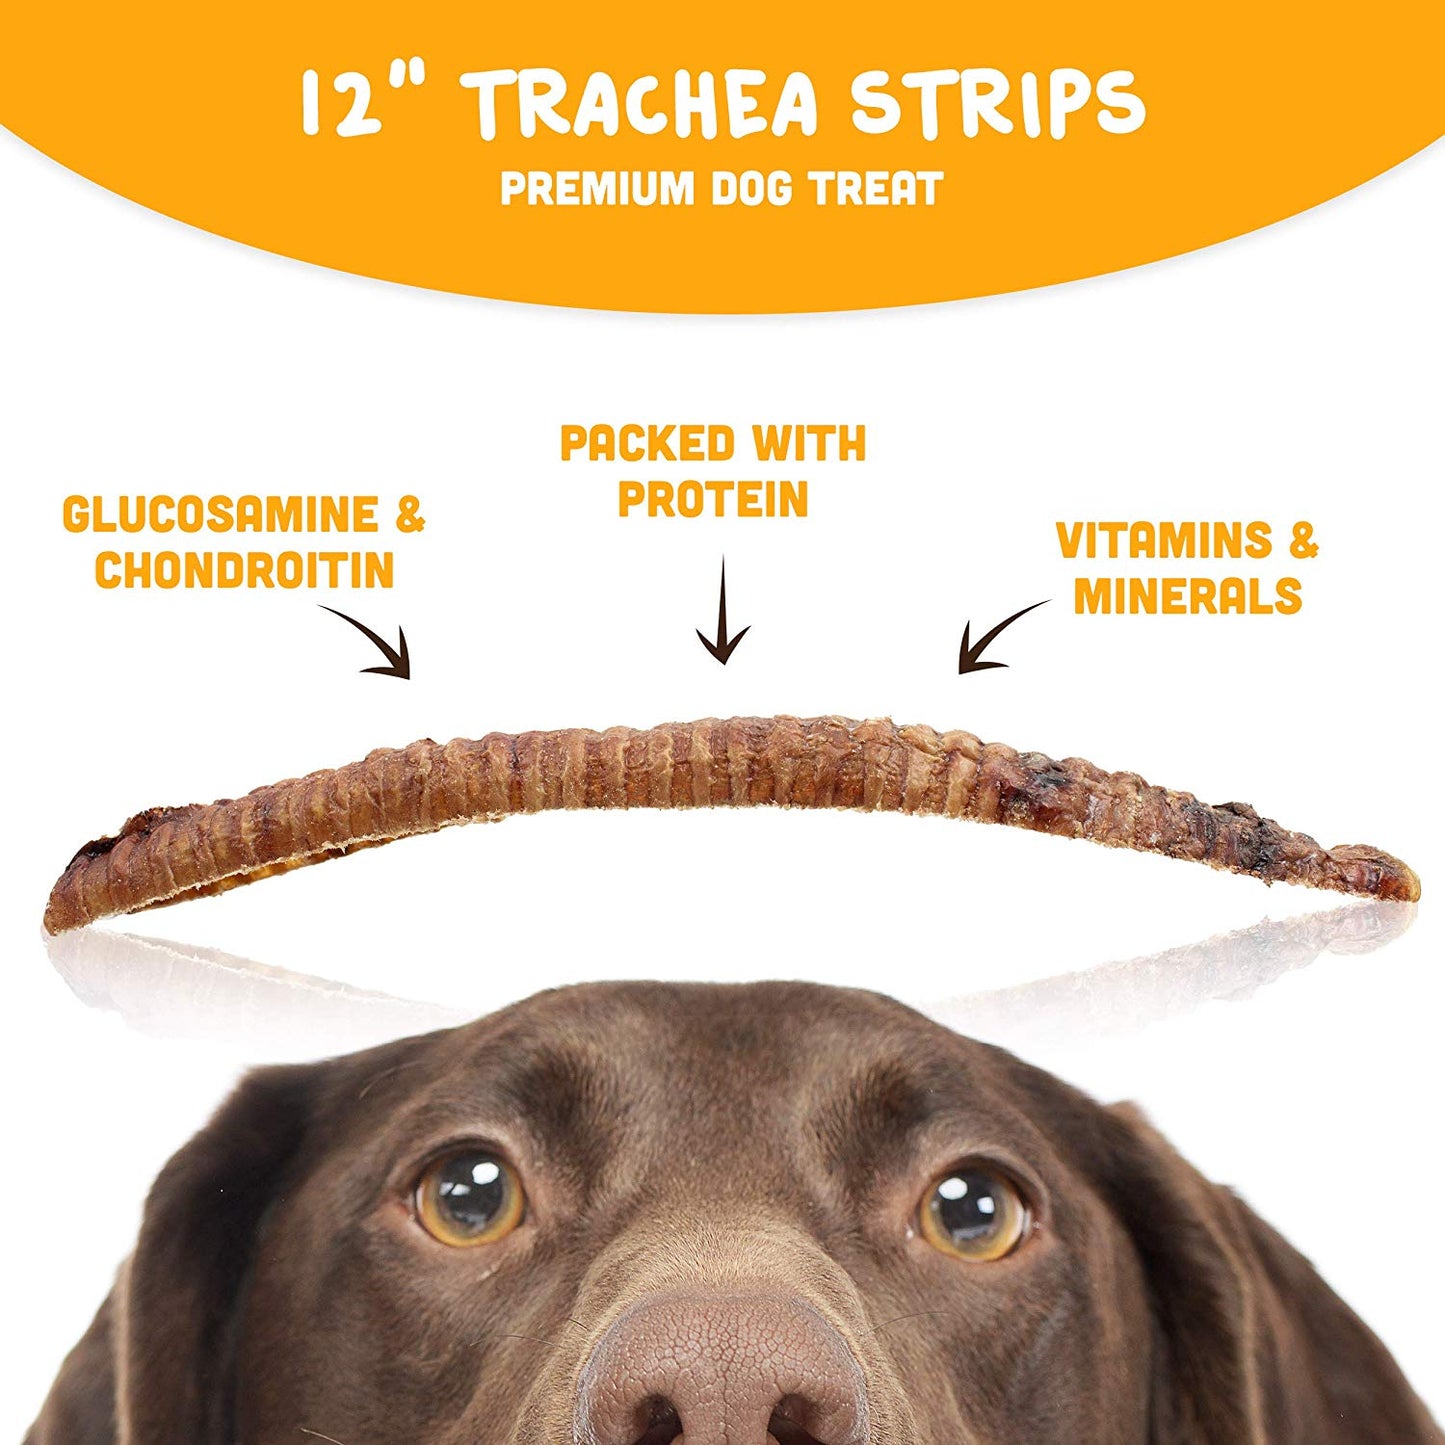 Premium 6" and 12" Beef Trachea Strip Dog Chews, Great Source of Glucosamine, 100% Natural Long-Lasting Treats for Small, Medium, and Large Dogs